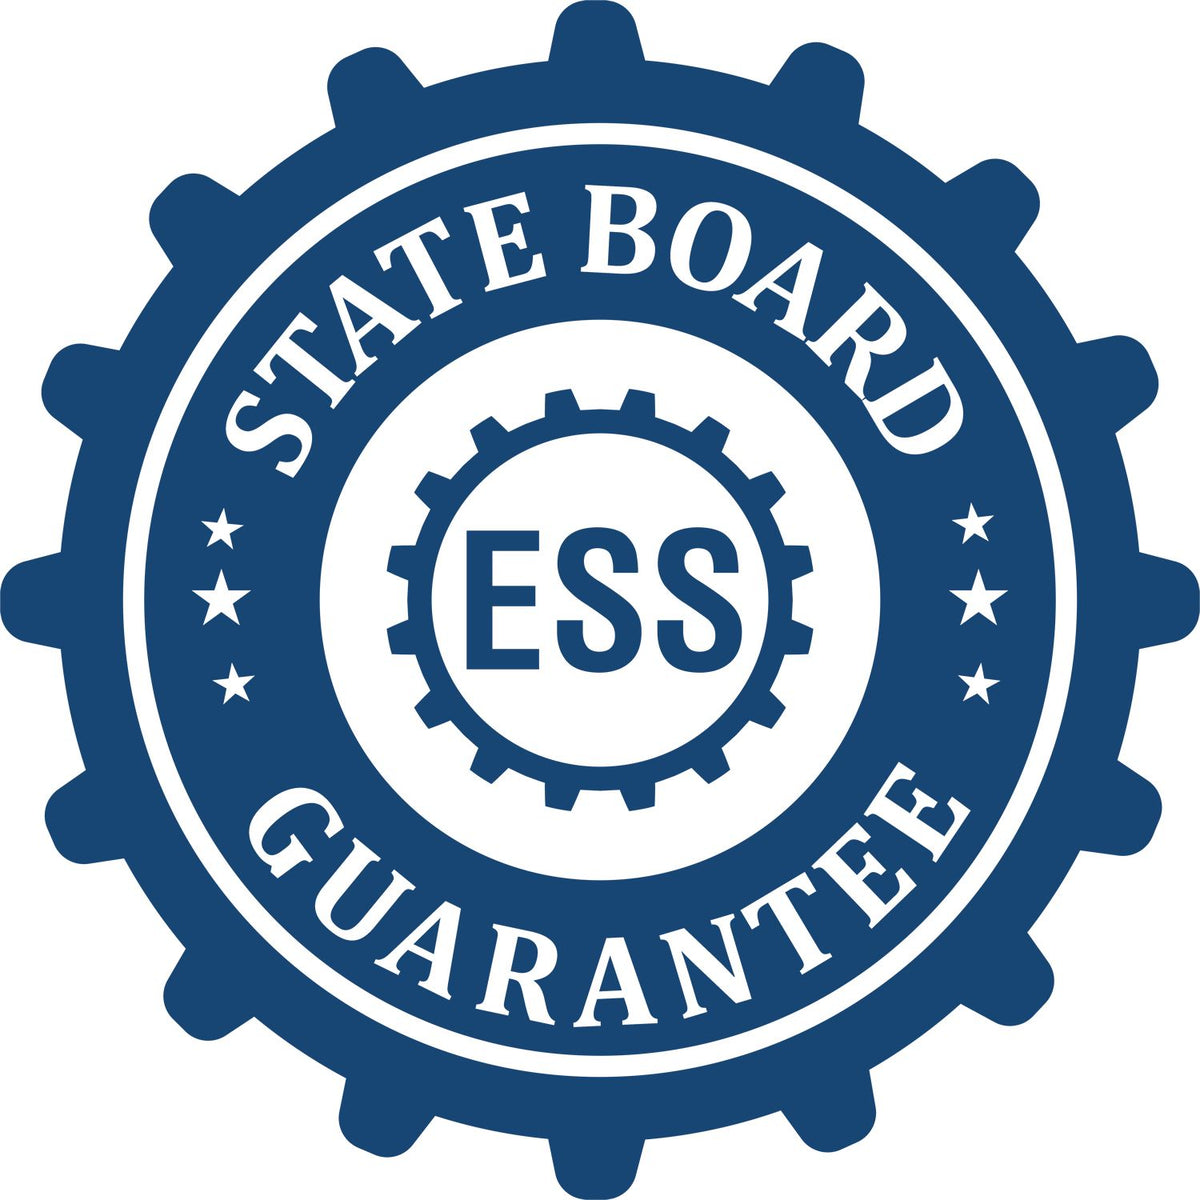 An emblem in a gear shape illustrating a state board guarantee for the Texas Desk Architect Embossing Seal product.